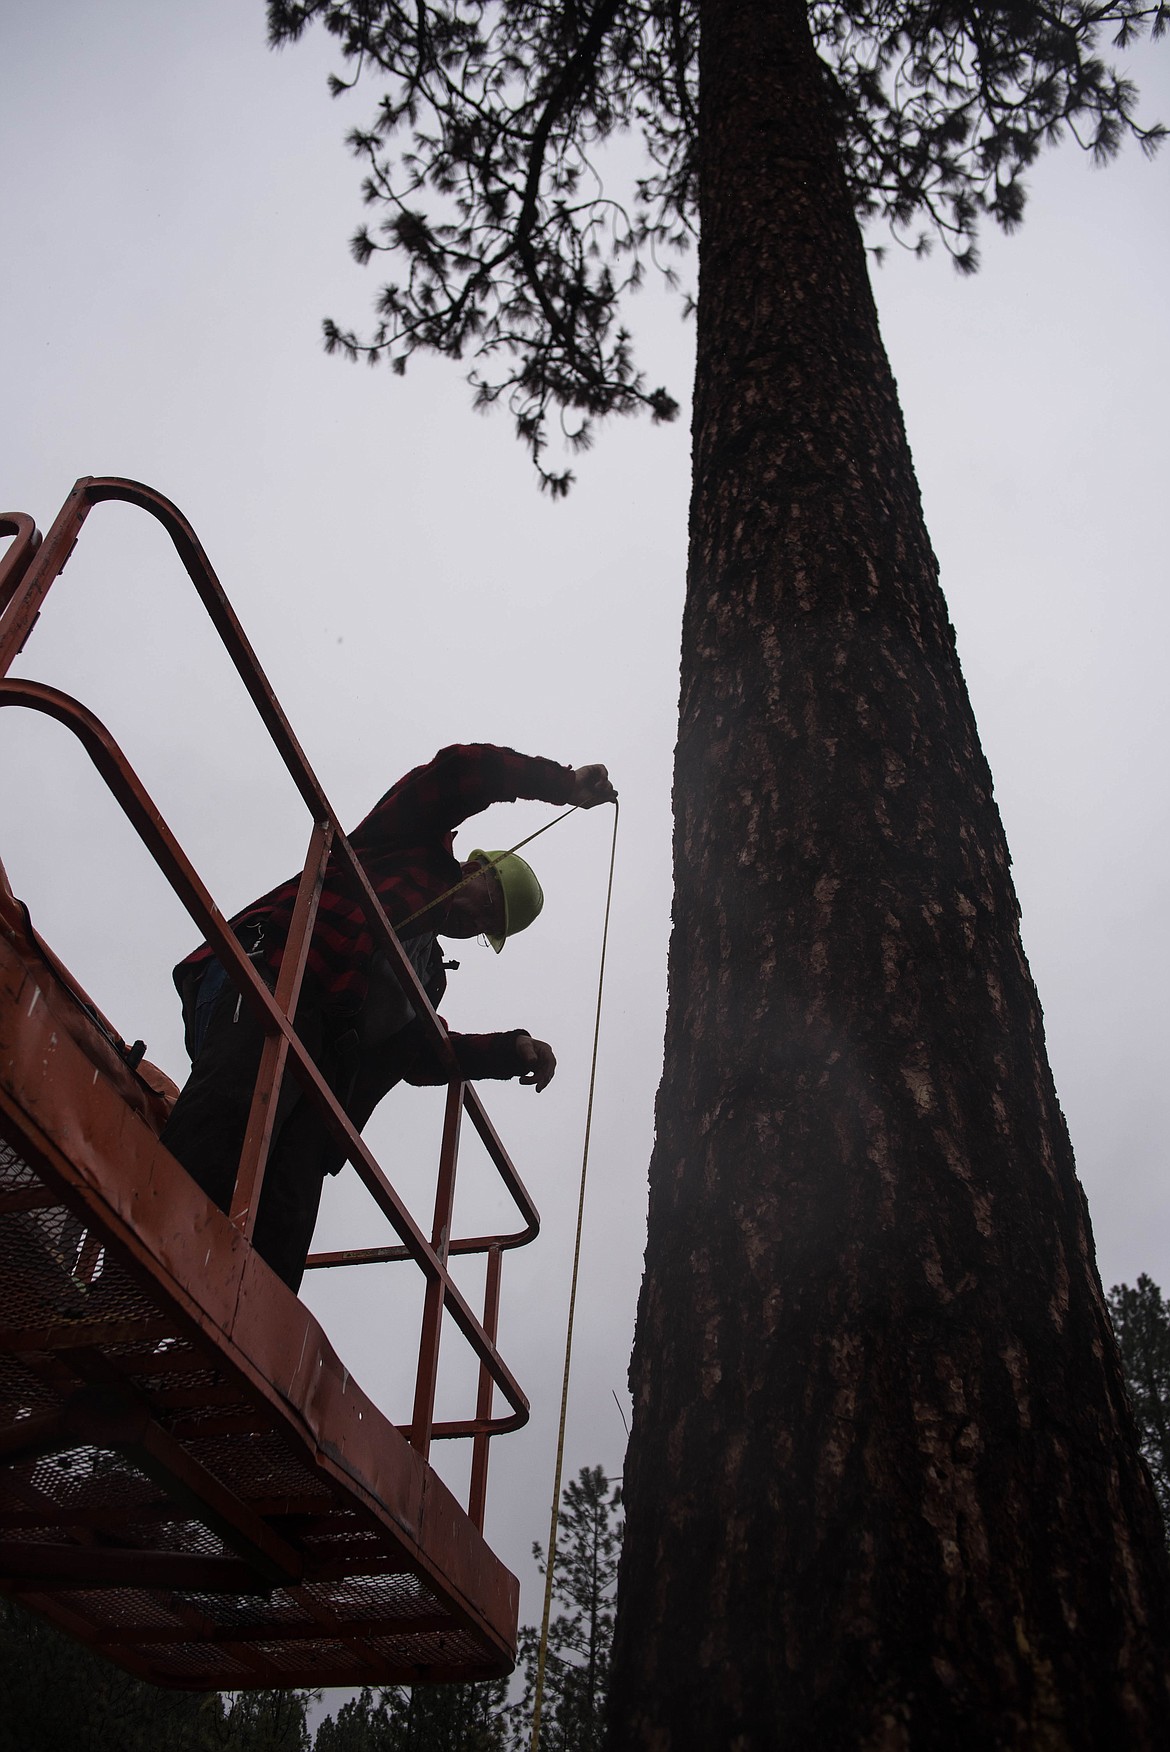 Gene Decker measures a ponderosa pine he is about to cut down at a tree cutting gathering, April 9 in Libby. Local artist Ron Adamson will carve the 12-foot stump into a forester overlooking the former mill site, in honor of Mel Parker, Mark Schoknecht and other foresters. (Luke Hollister/The Western News)